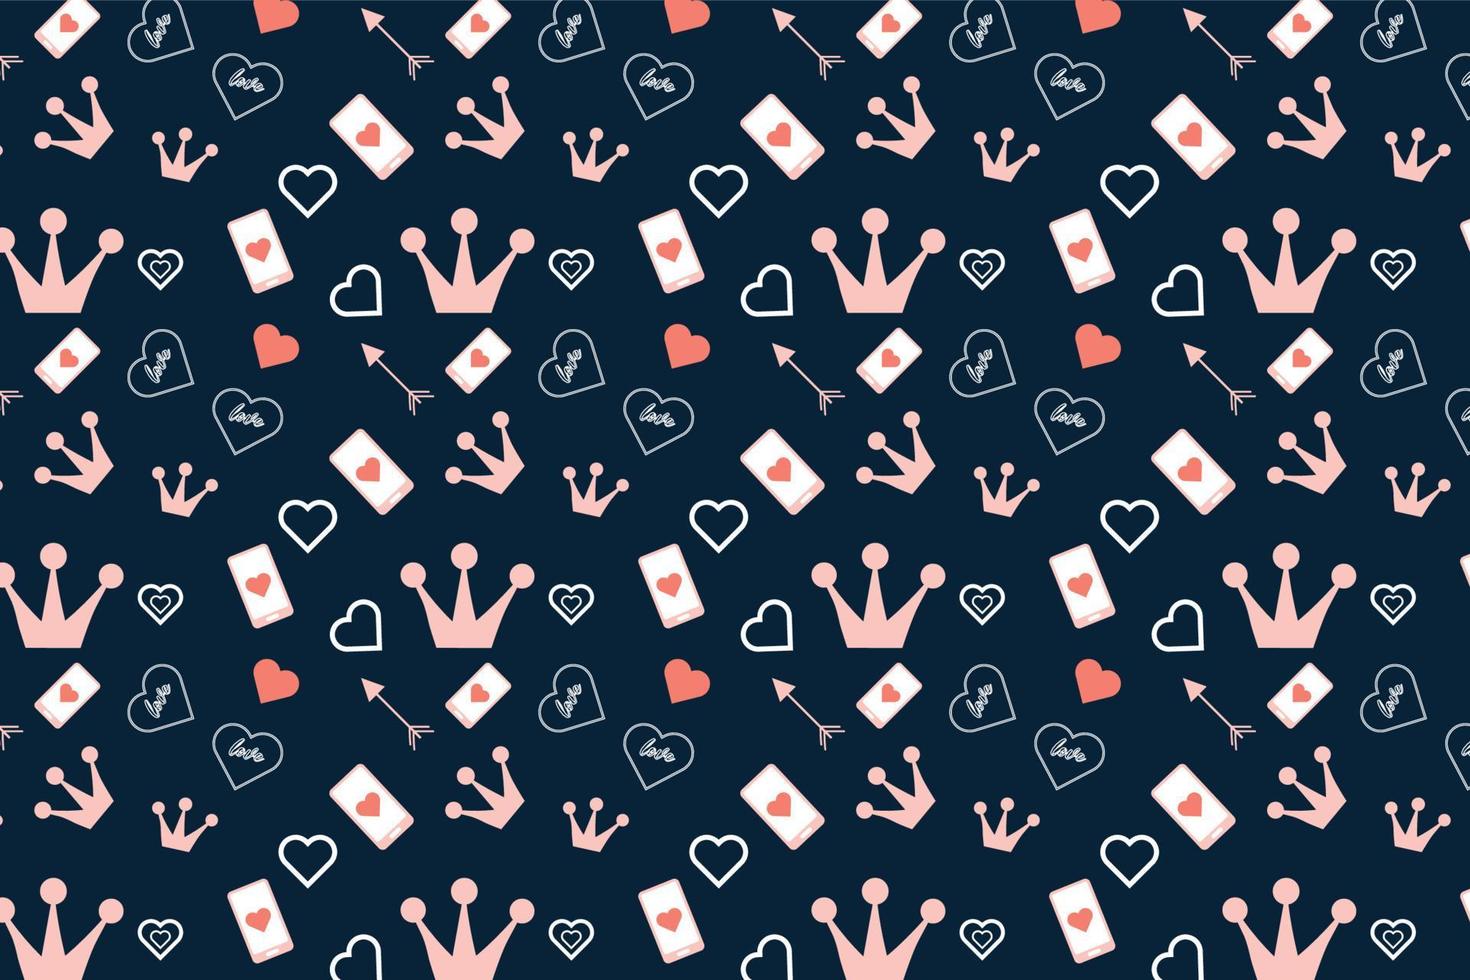 Cute seamless love pattern design with king crowns and love shapes. Minimalist love pattern background for wallpapers and bed sheets. Valentines day pattern decoration on a dark background. vector